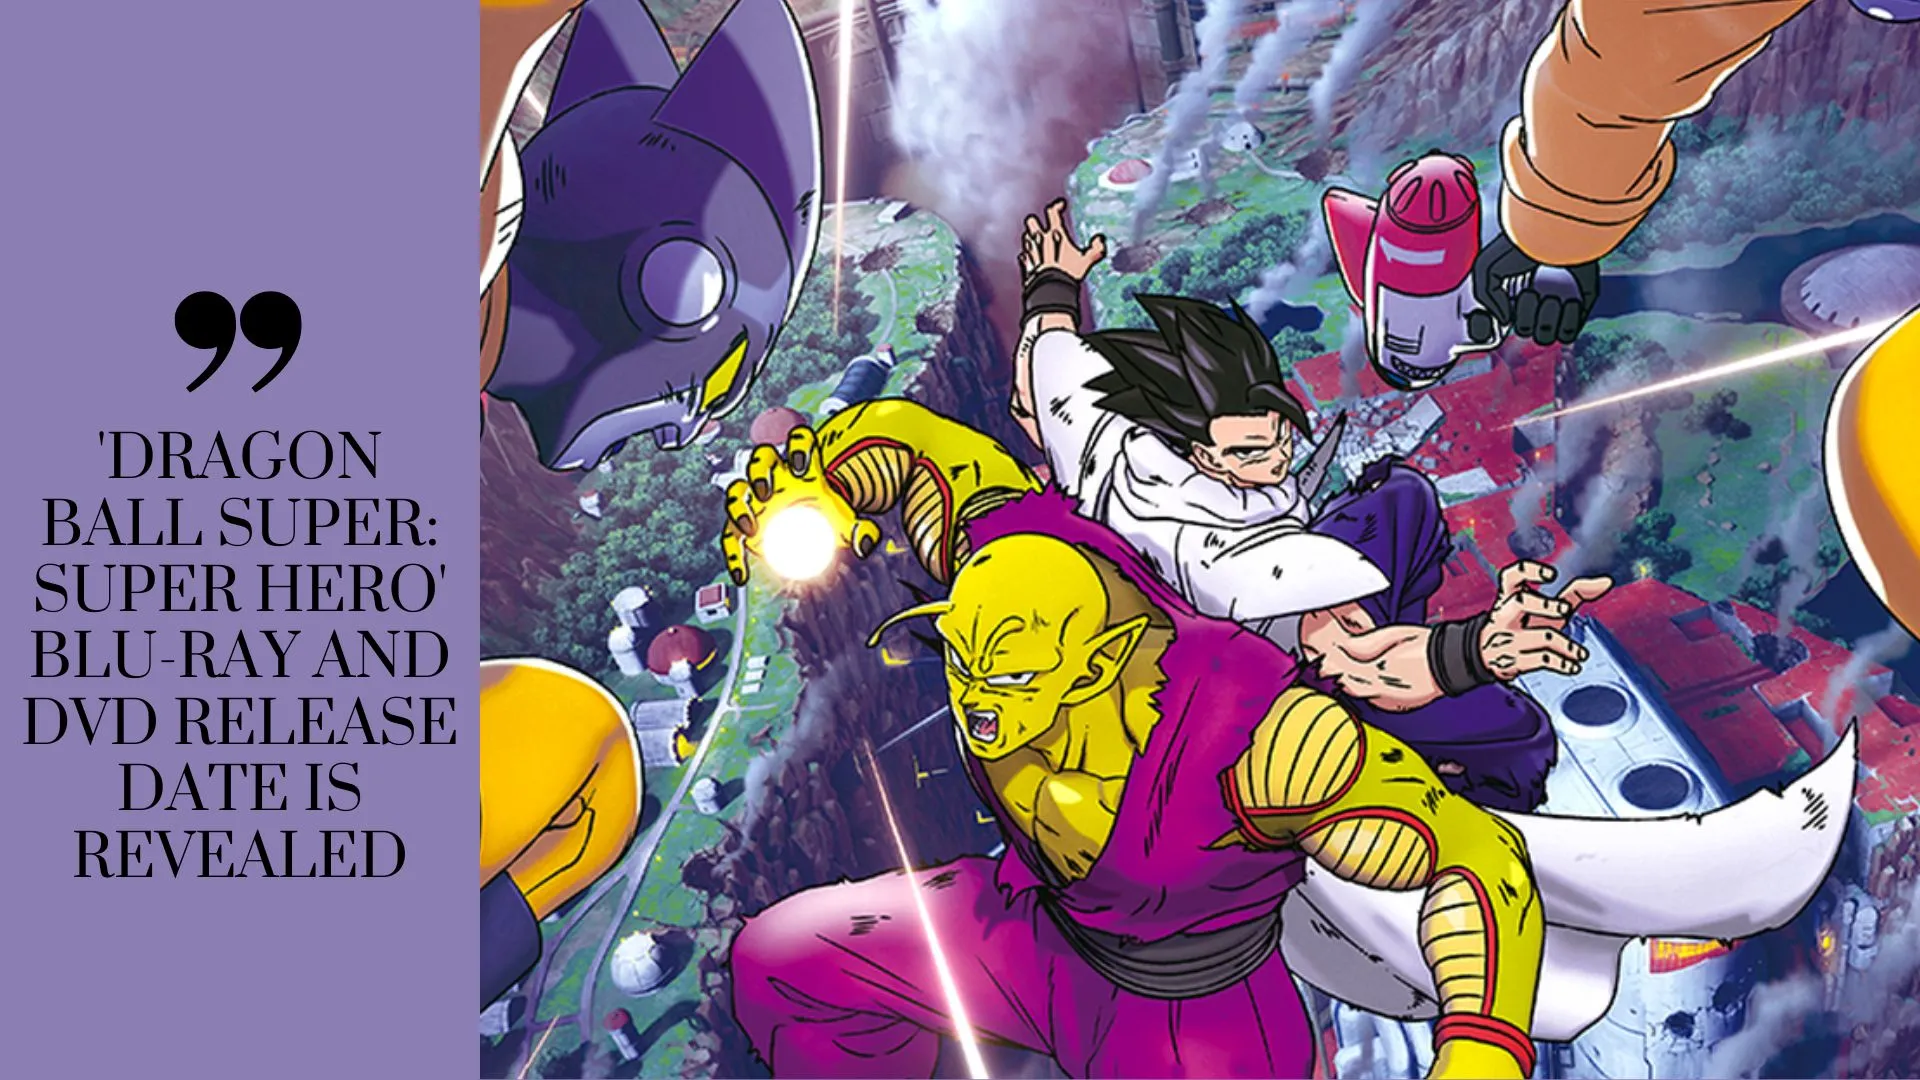 'Dragon Ball Super: Super Hero' Blu-Ray and DVD Release Date is revealed (Image credit: collider)